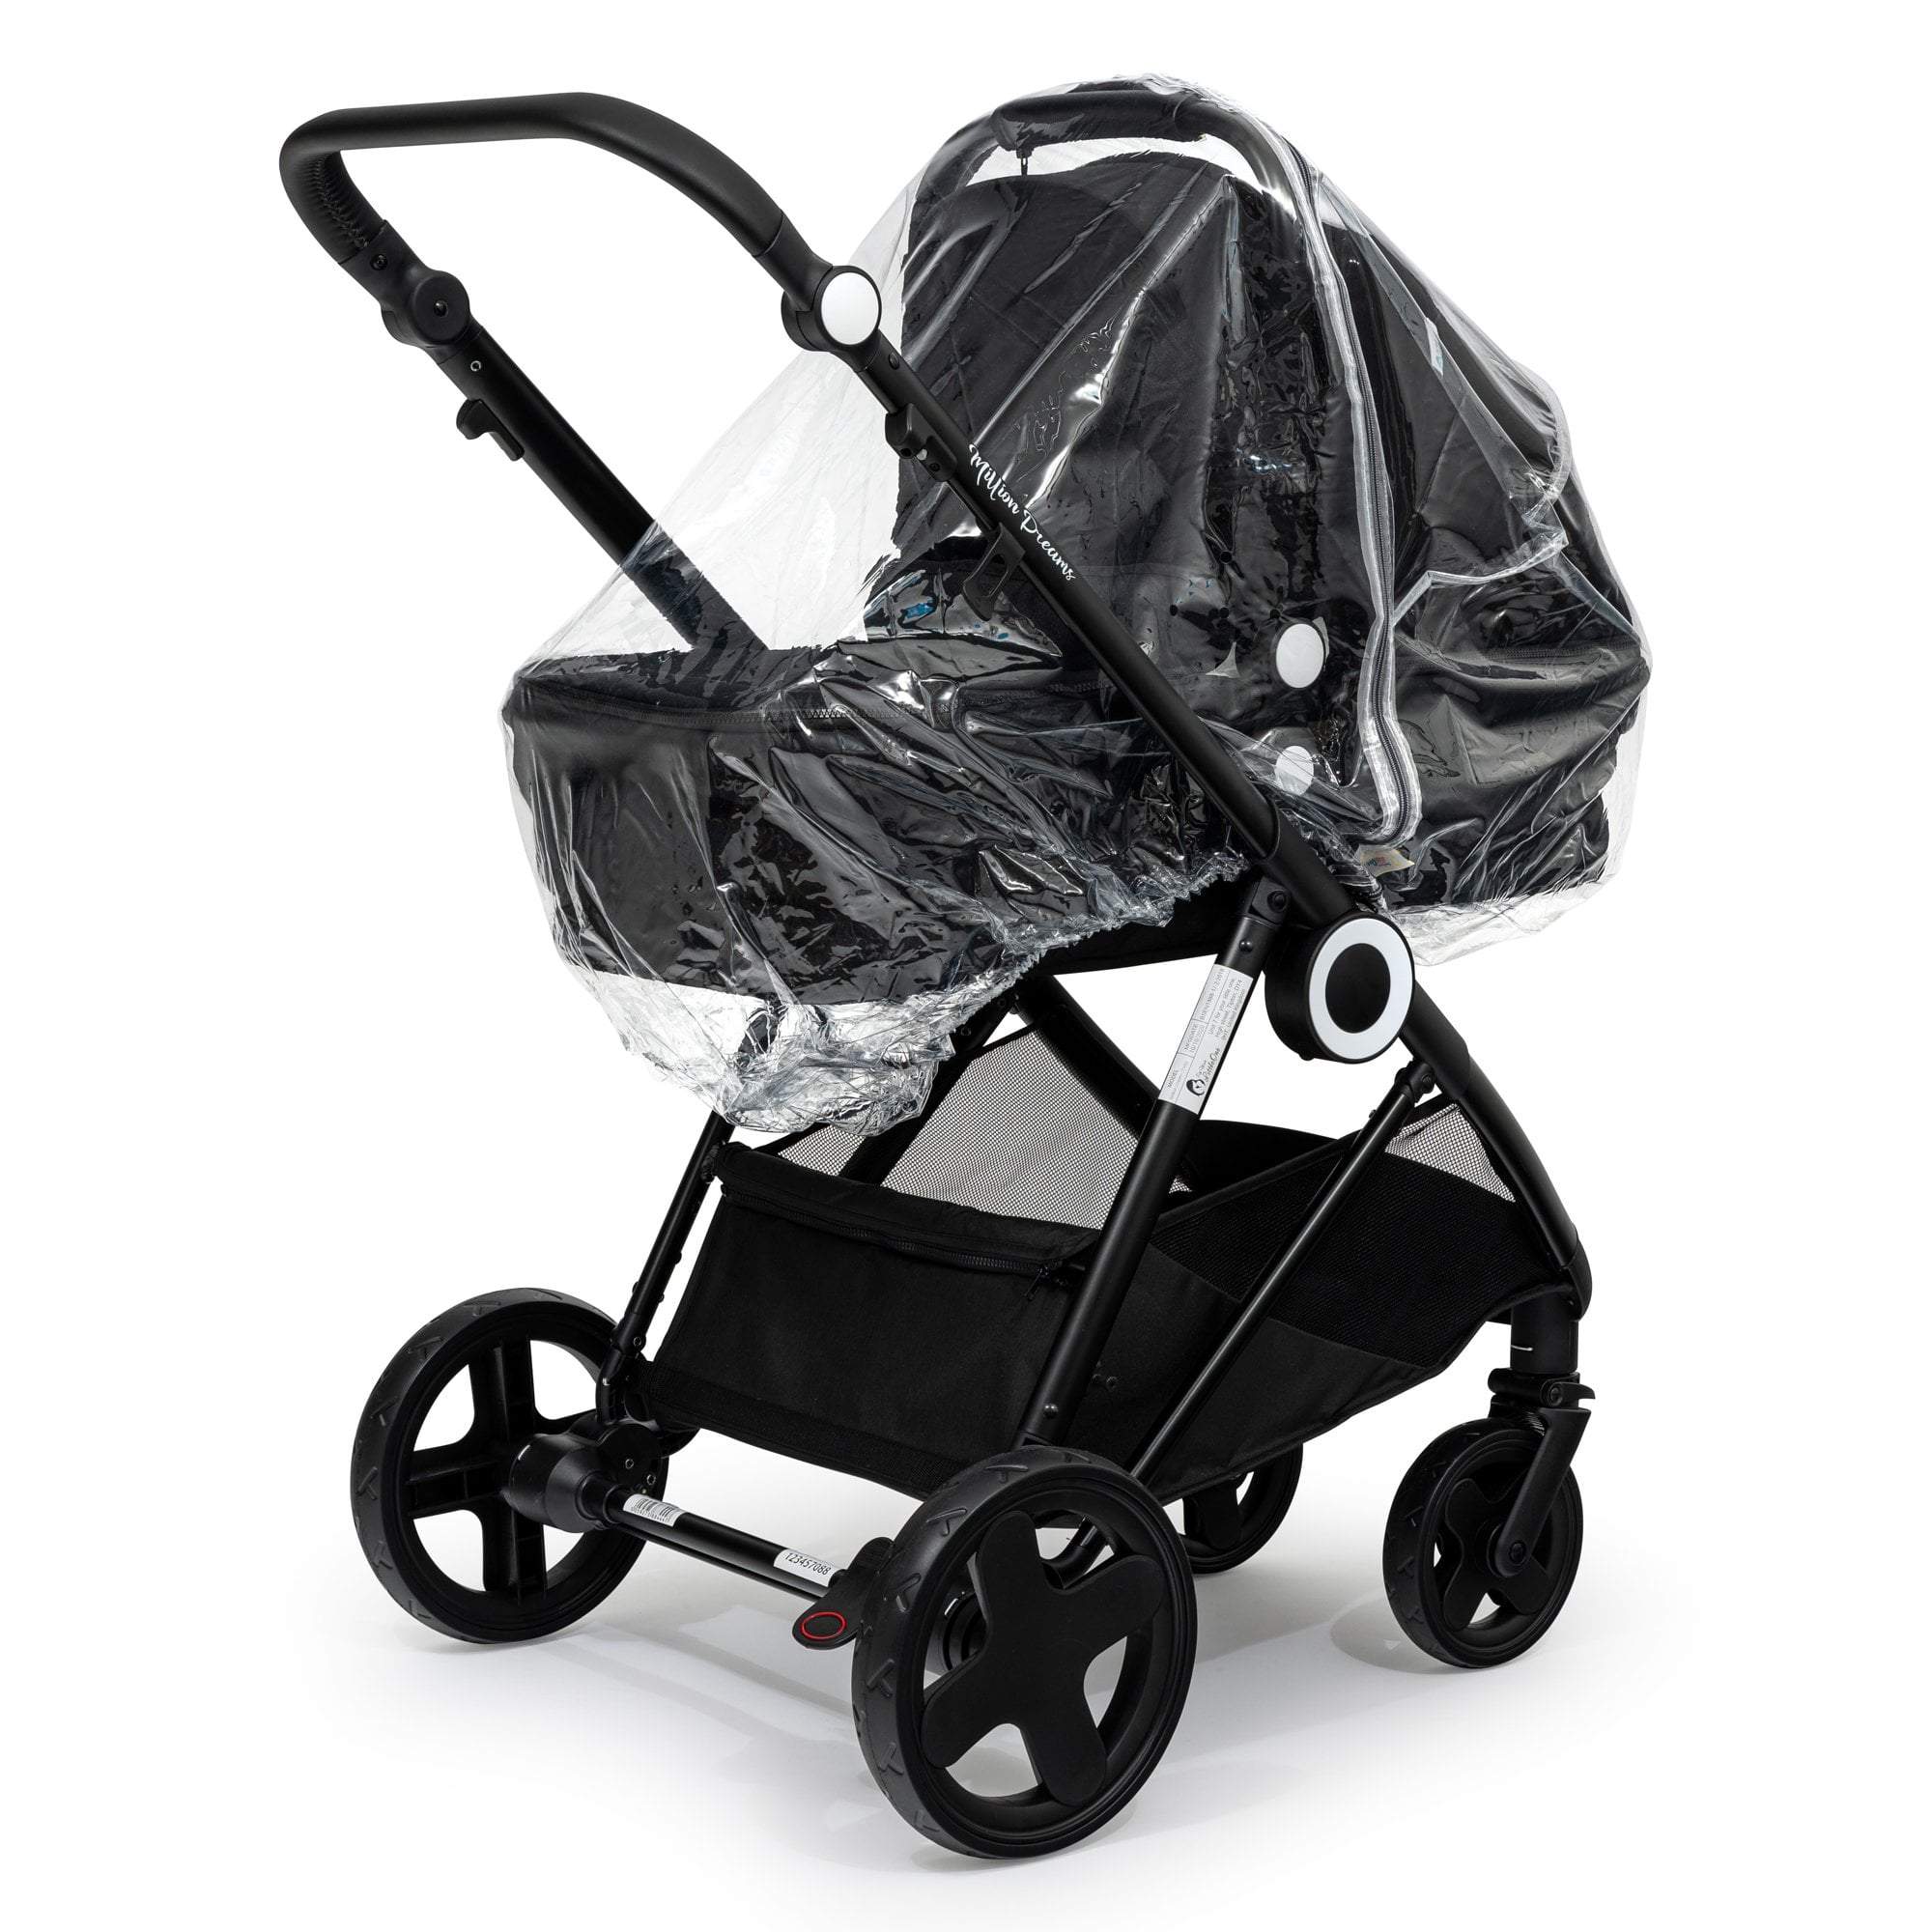 Carrycot Raincover Compatible With Baby Jogger - Fits All Models - For Your Little One